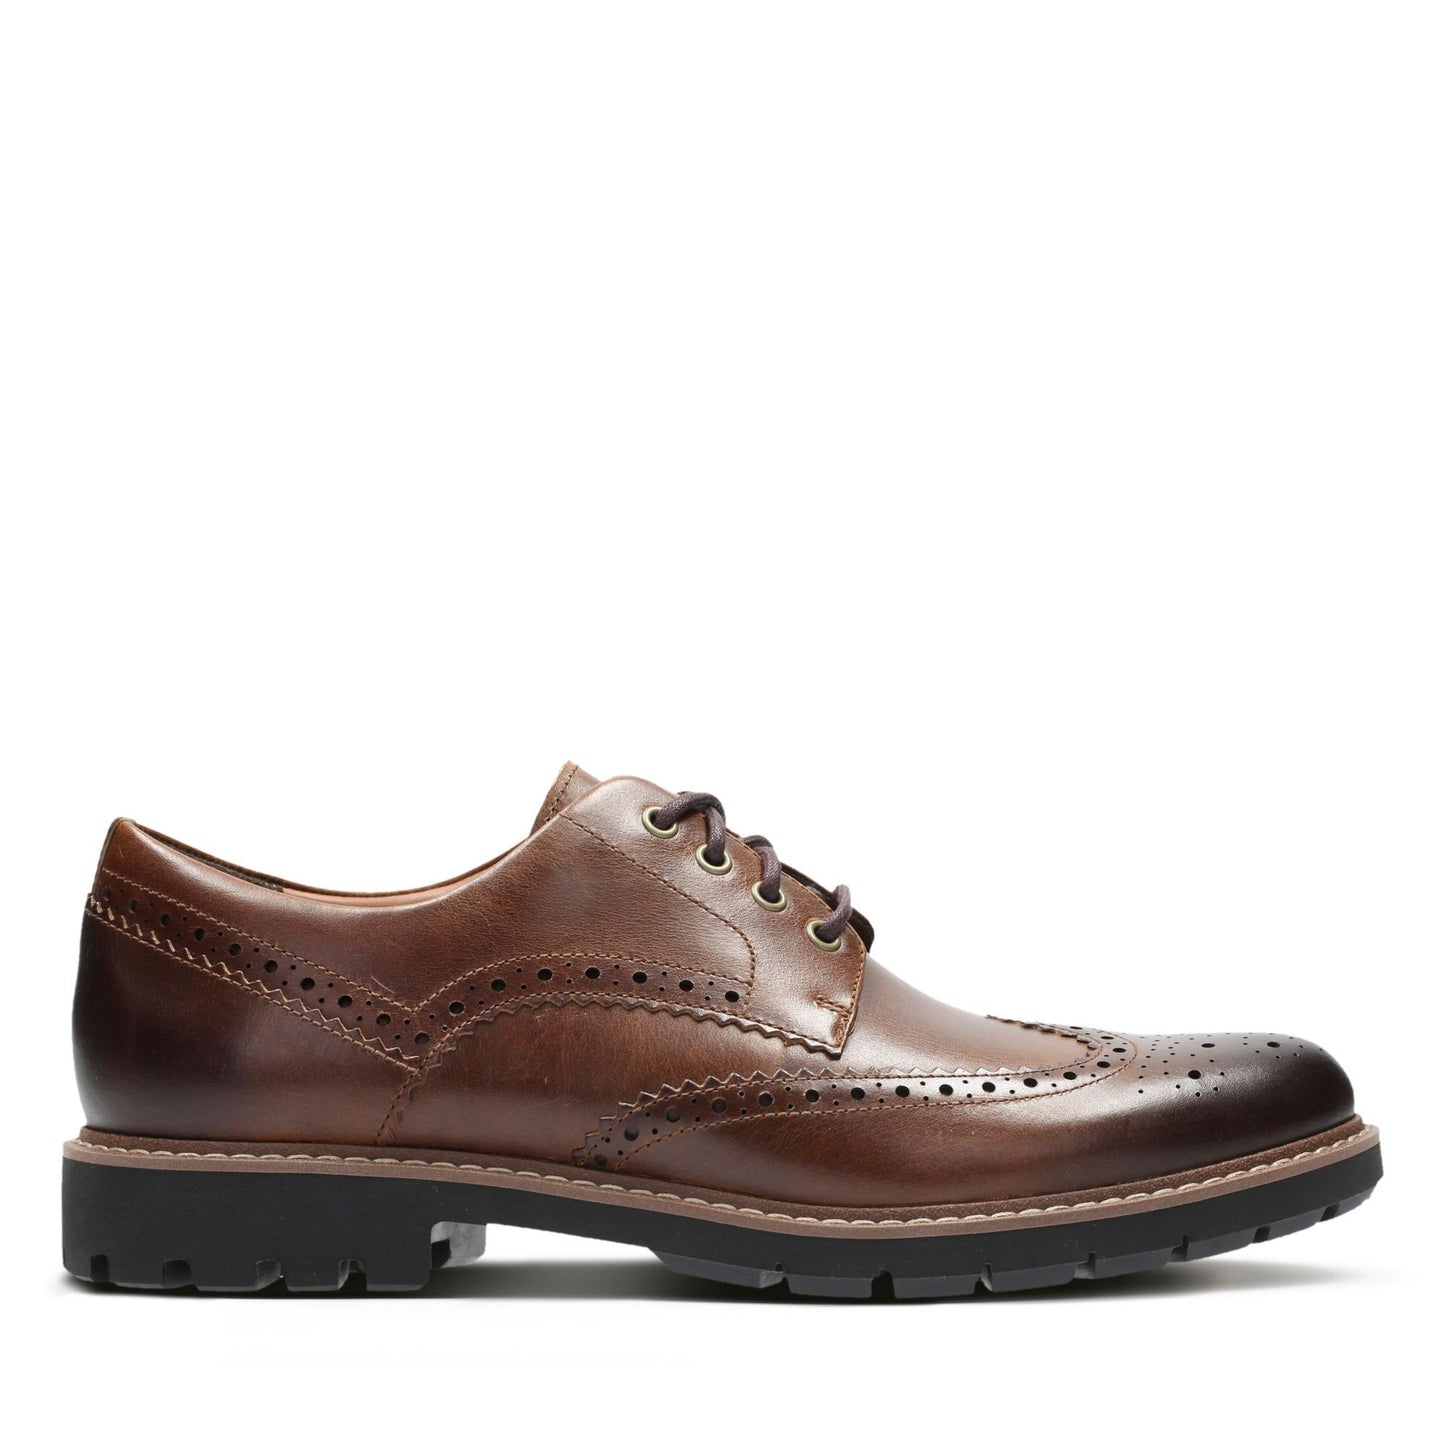  The cleated rubber sole offers unbeatable grip and a masculine appeal to these men's brogues.